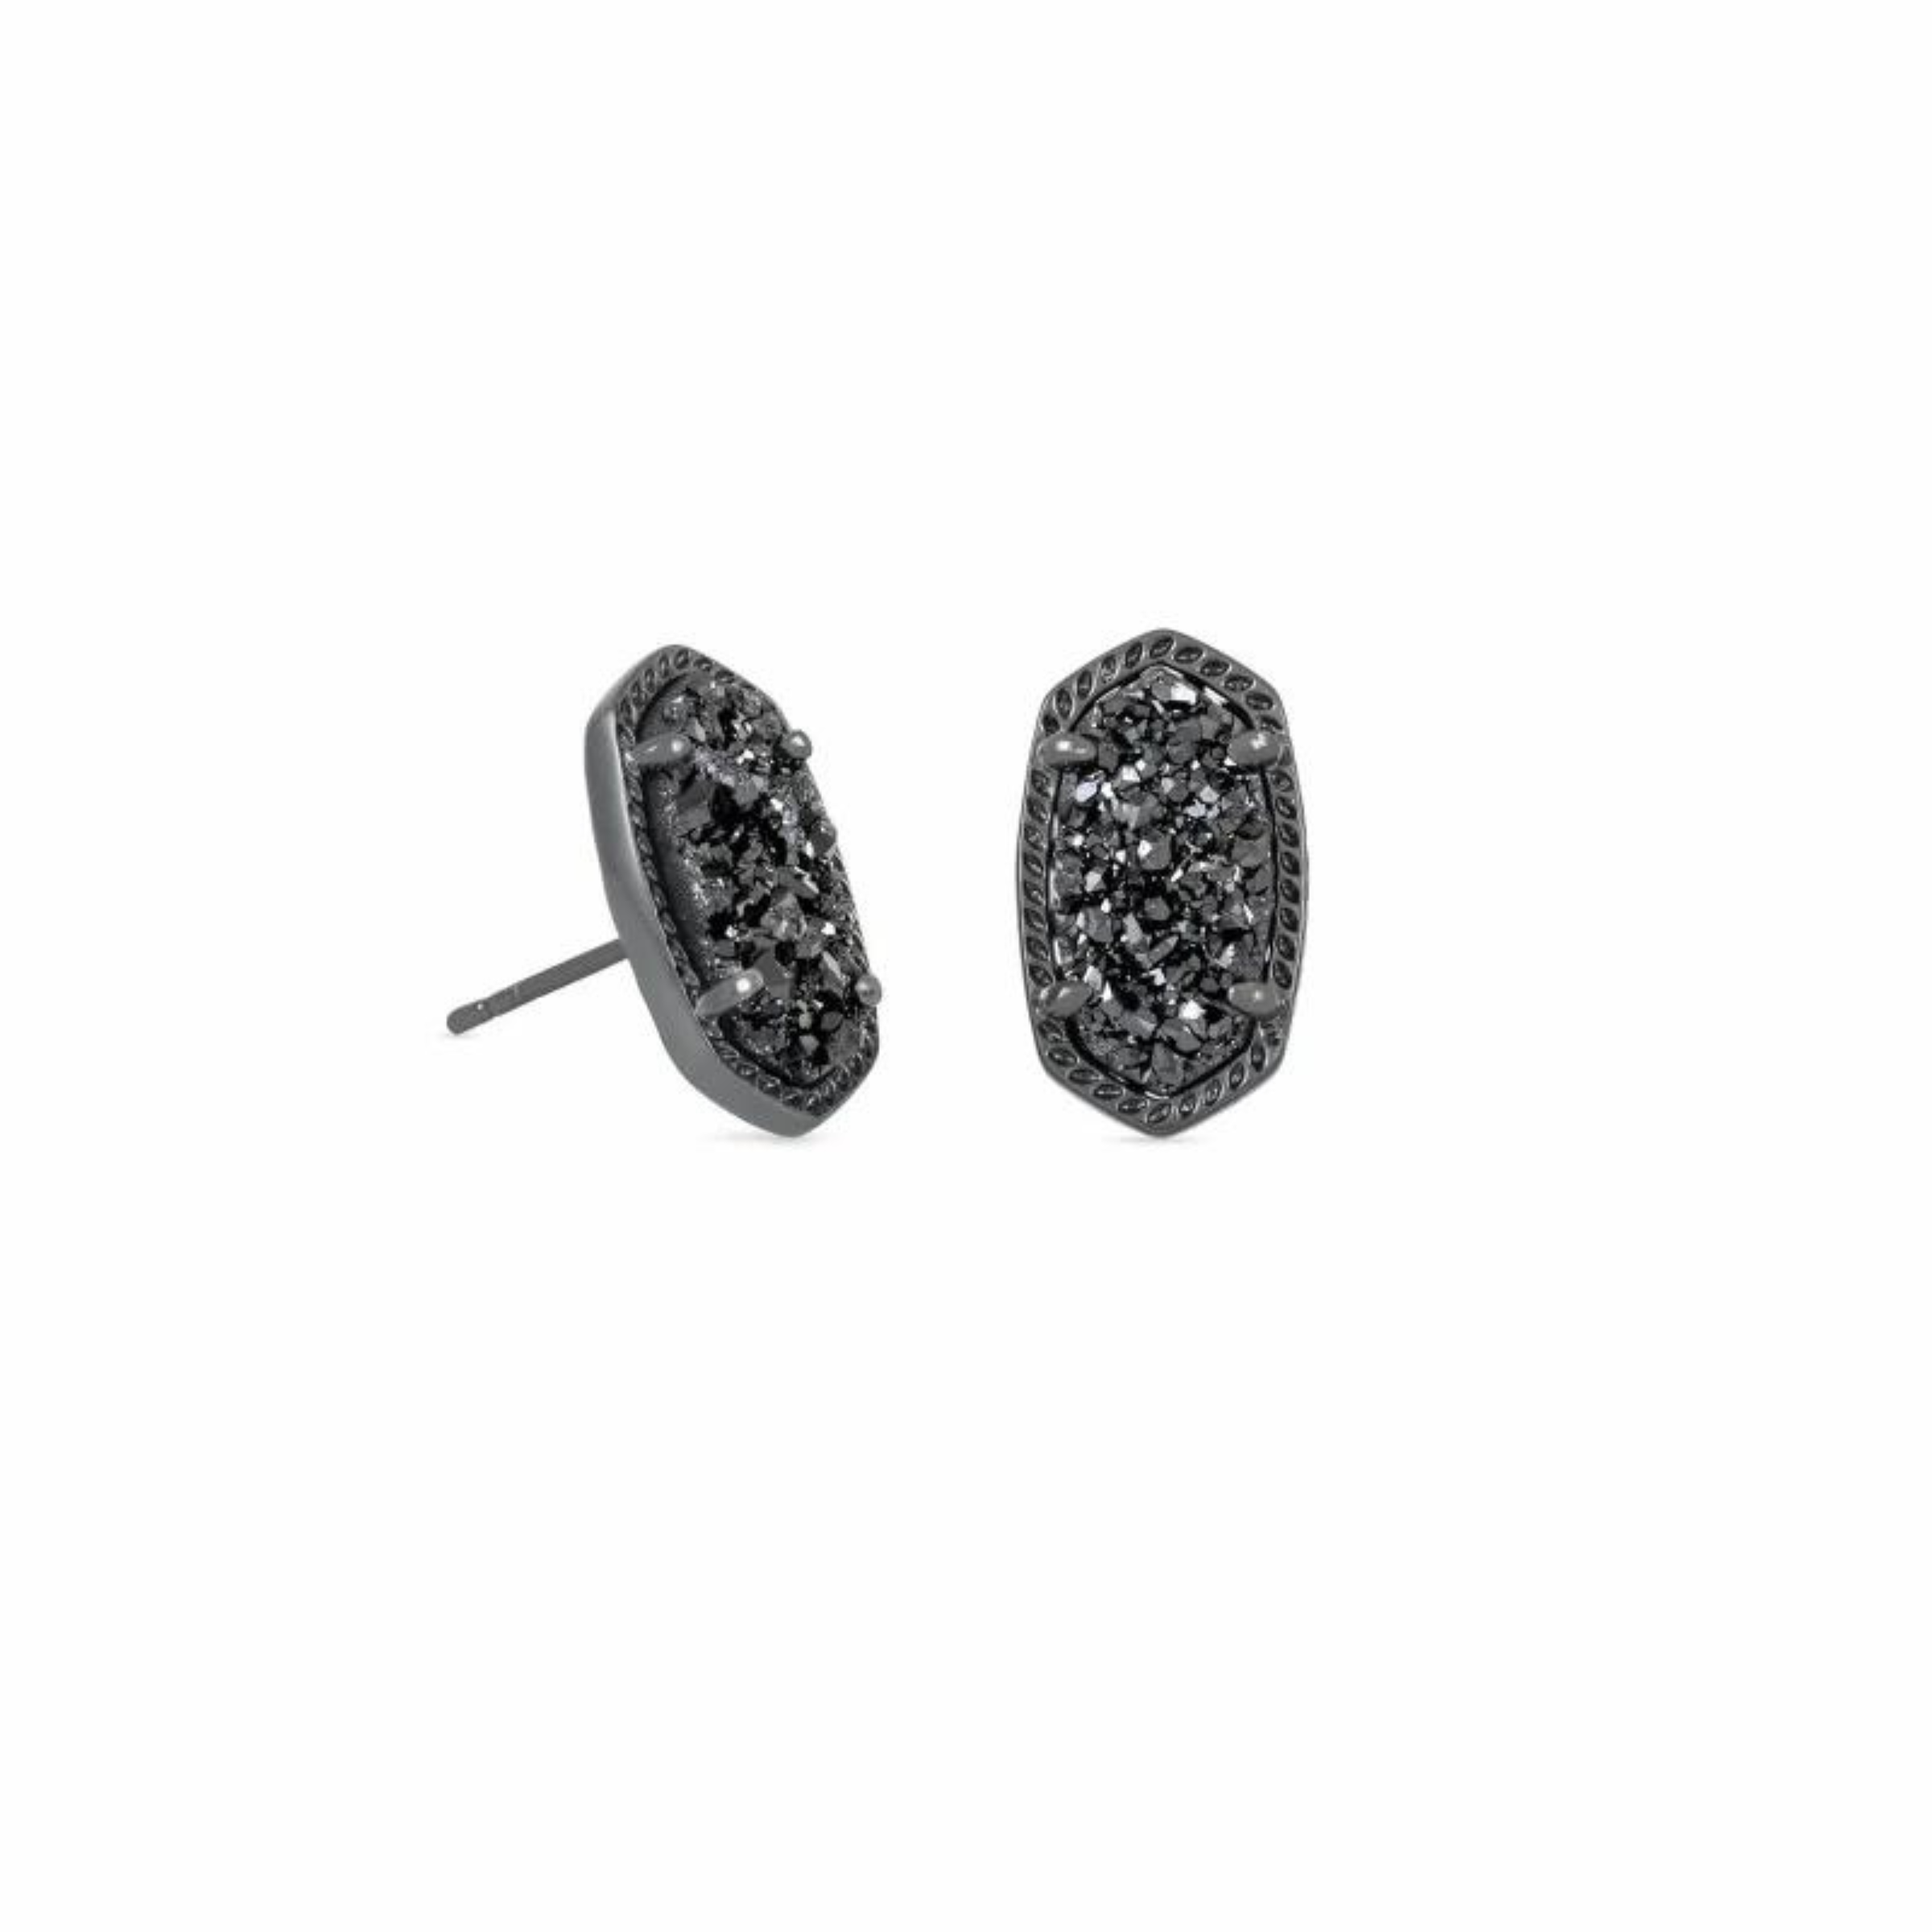 Gunmetall black studs with a black dusy stone, pictured on a white background.